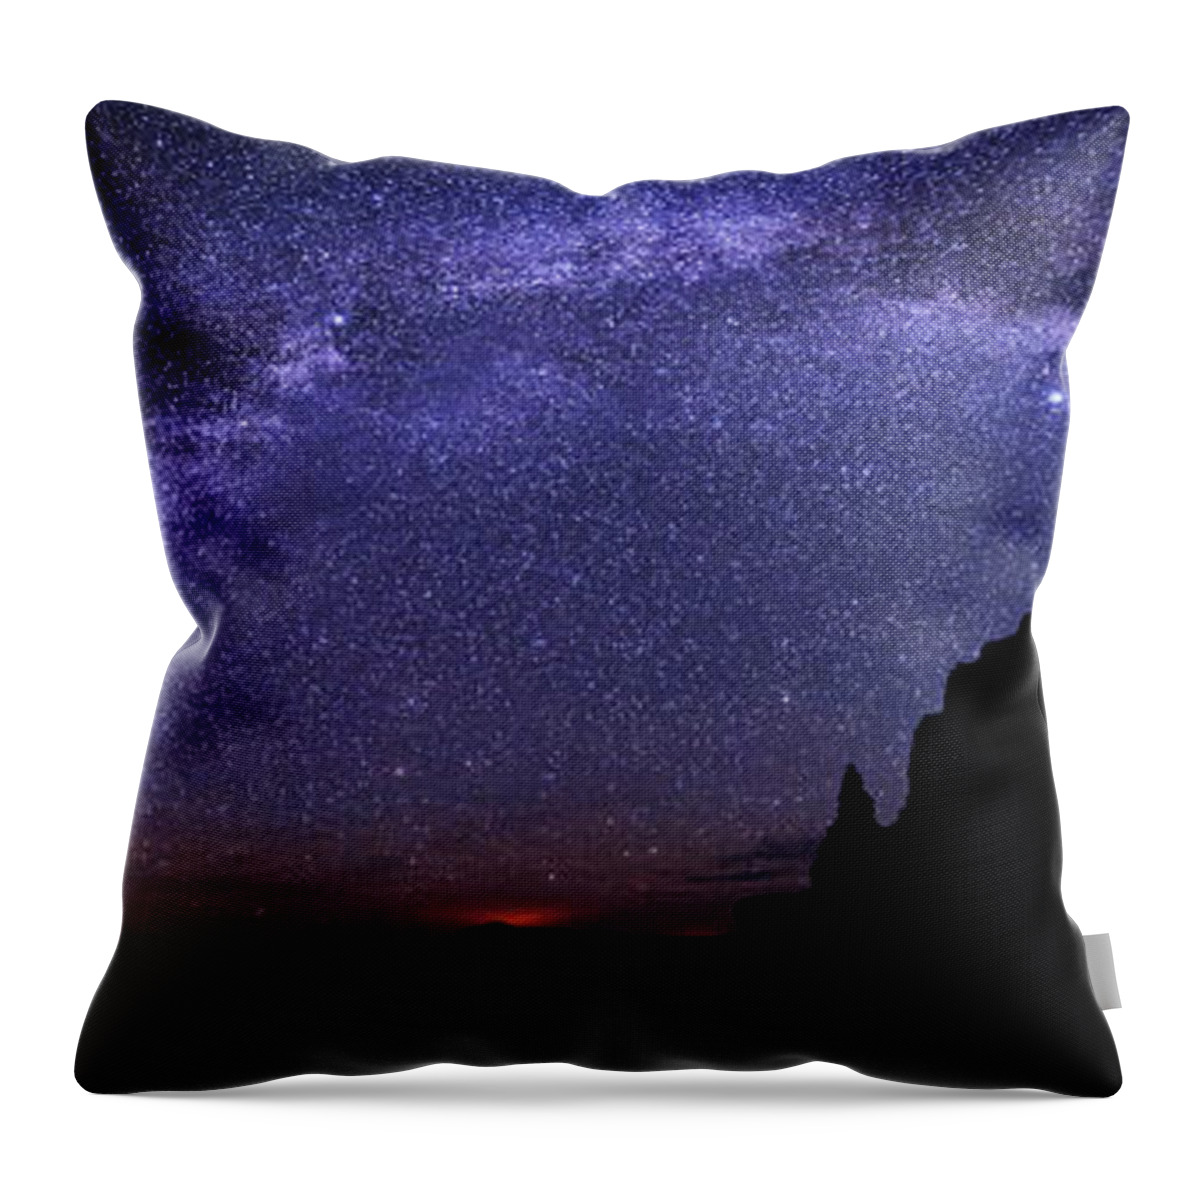 Celestial Arch Throw Pillow featuring the photograph Celestial Arch by Chad Dutson